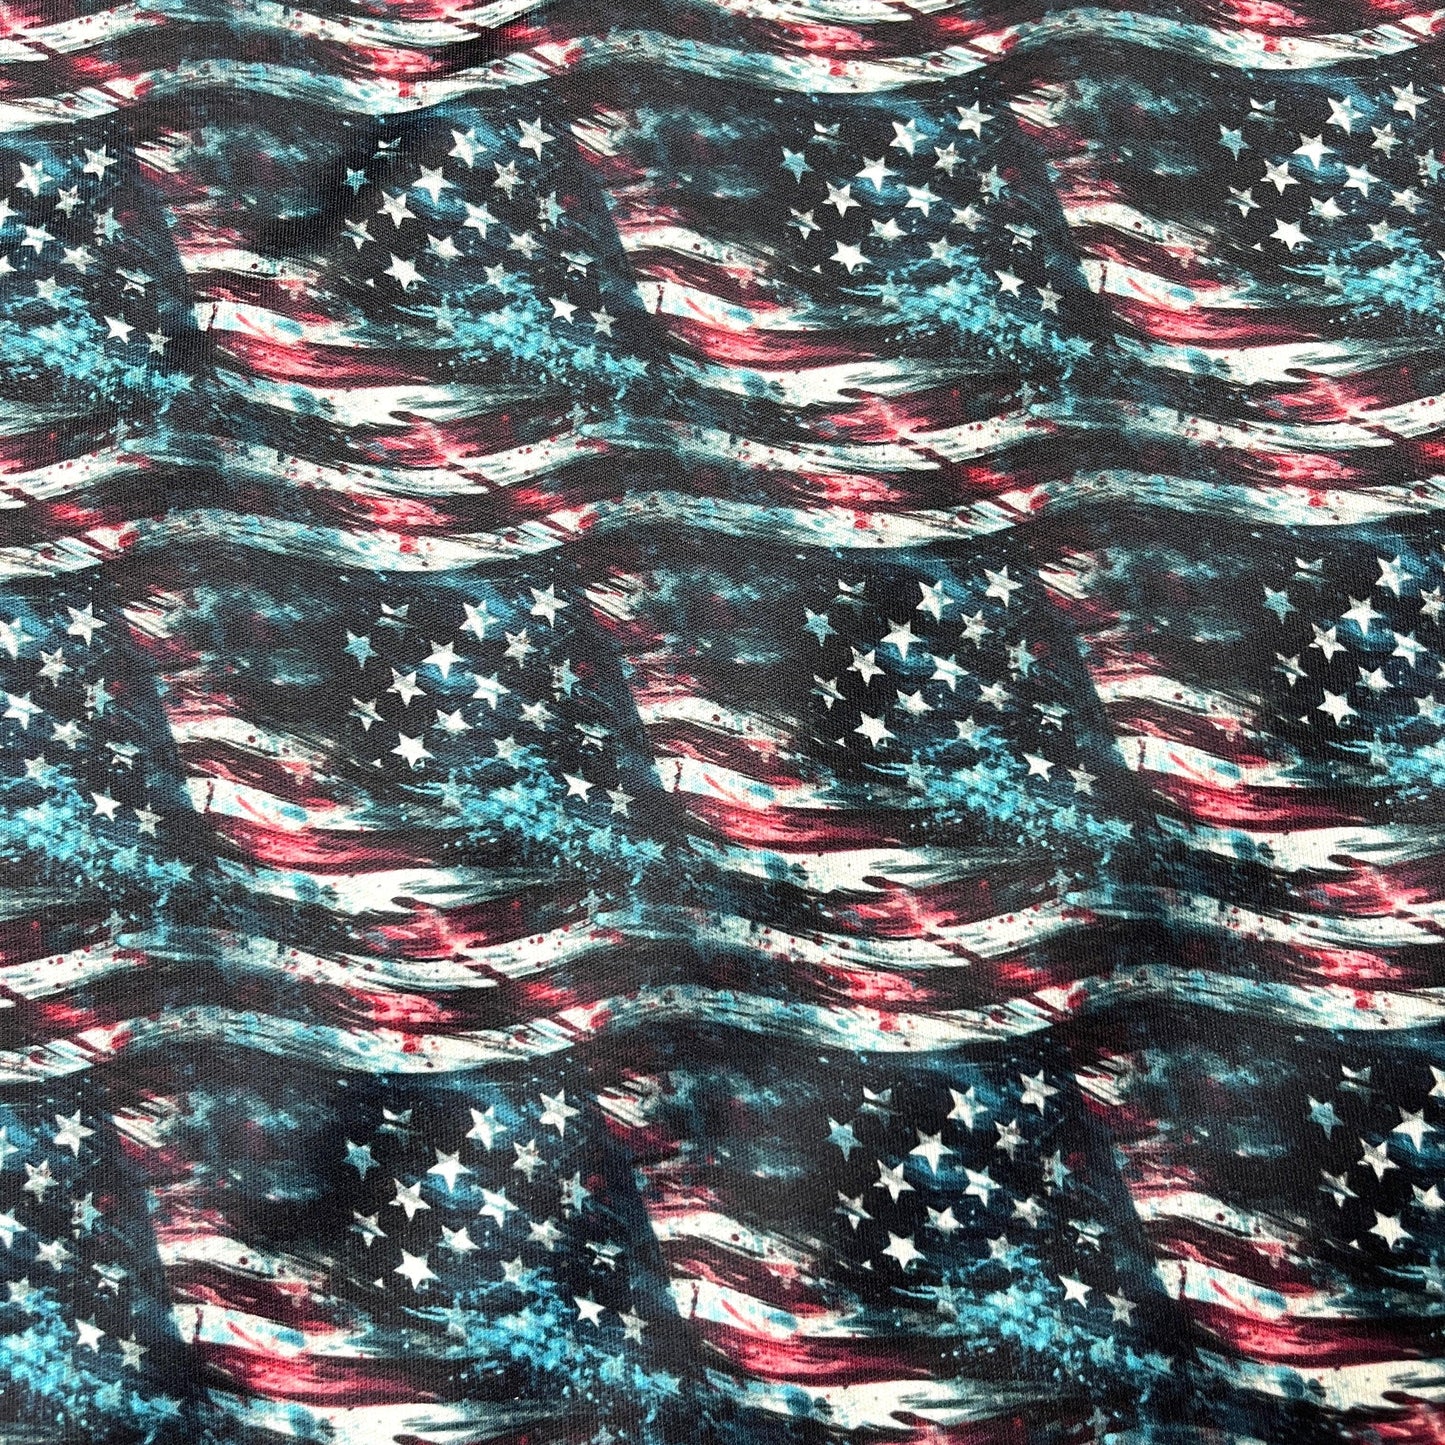 Distressed Flags 1 mil PUL Fabric - Made in the USA - Nature's Fabrics